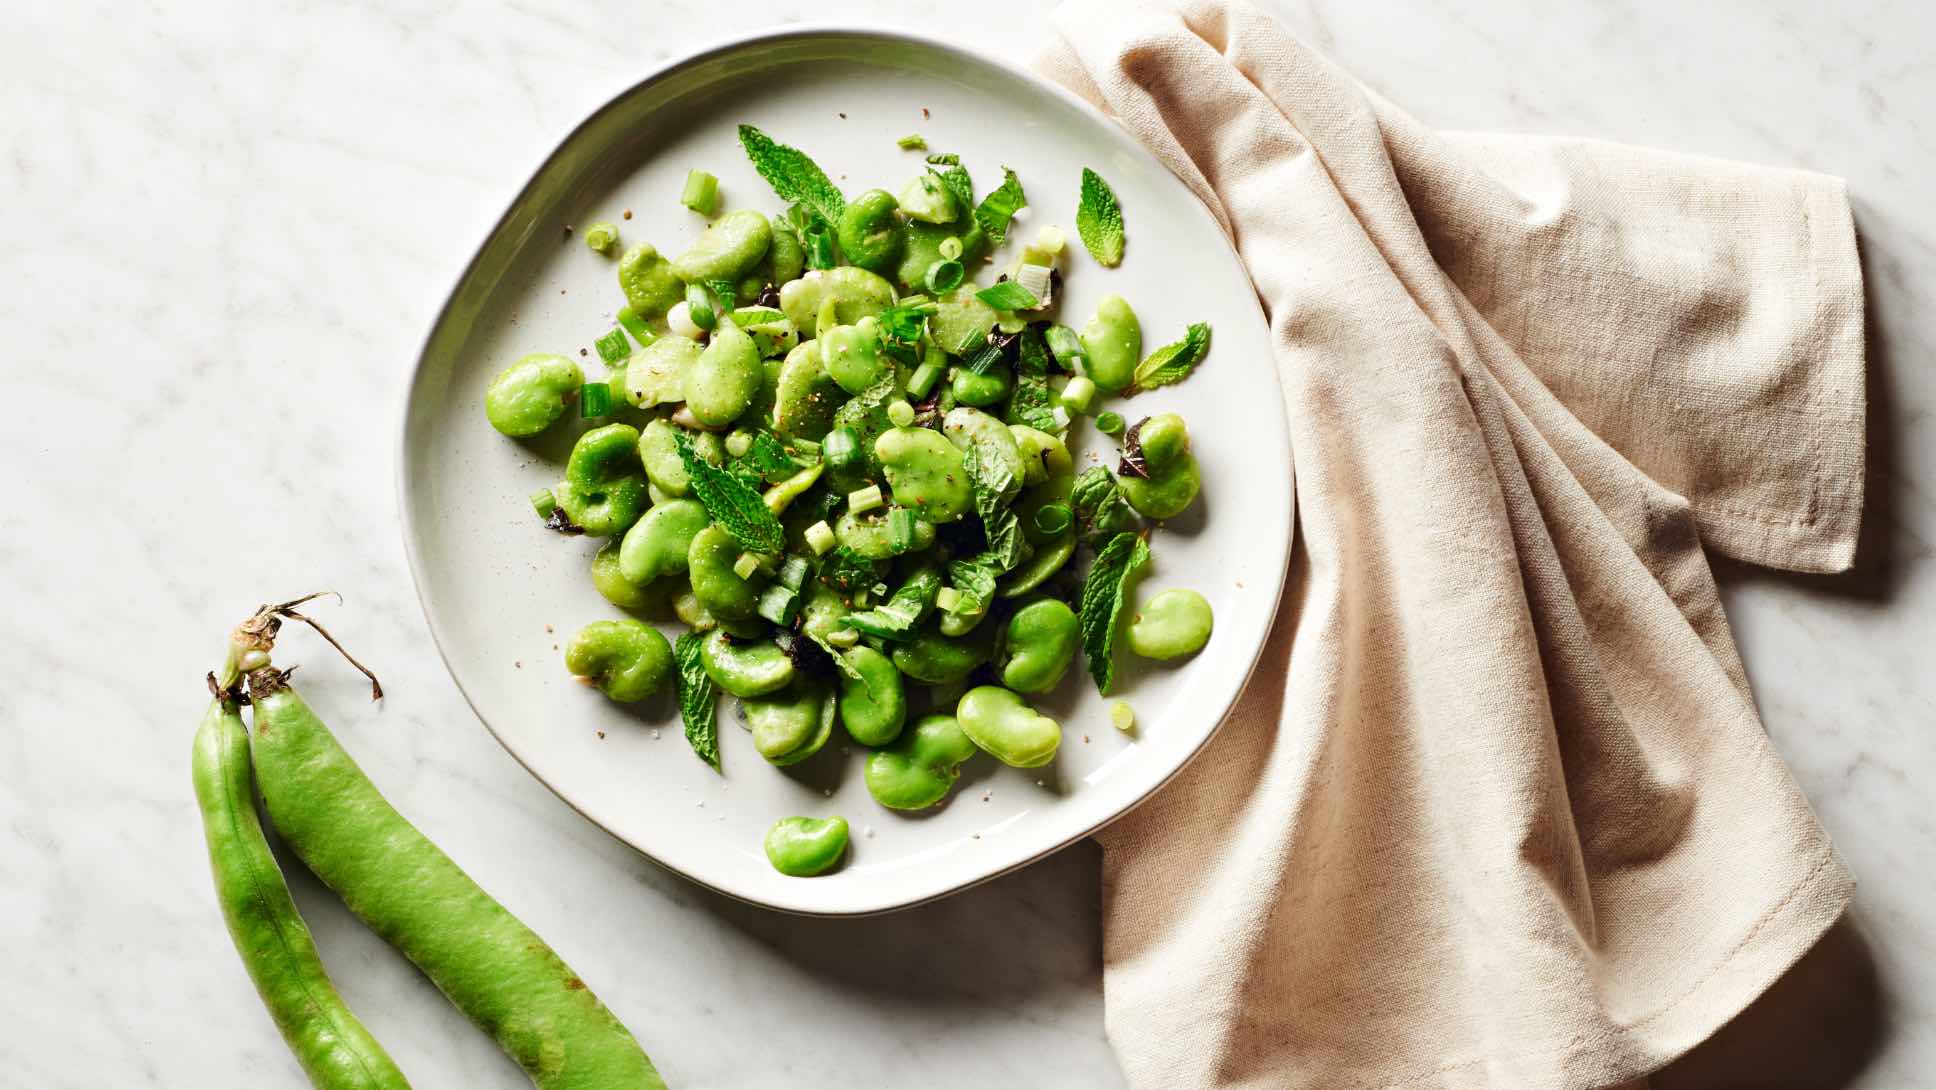 A plate of fresh fava beans with mint and scallions.